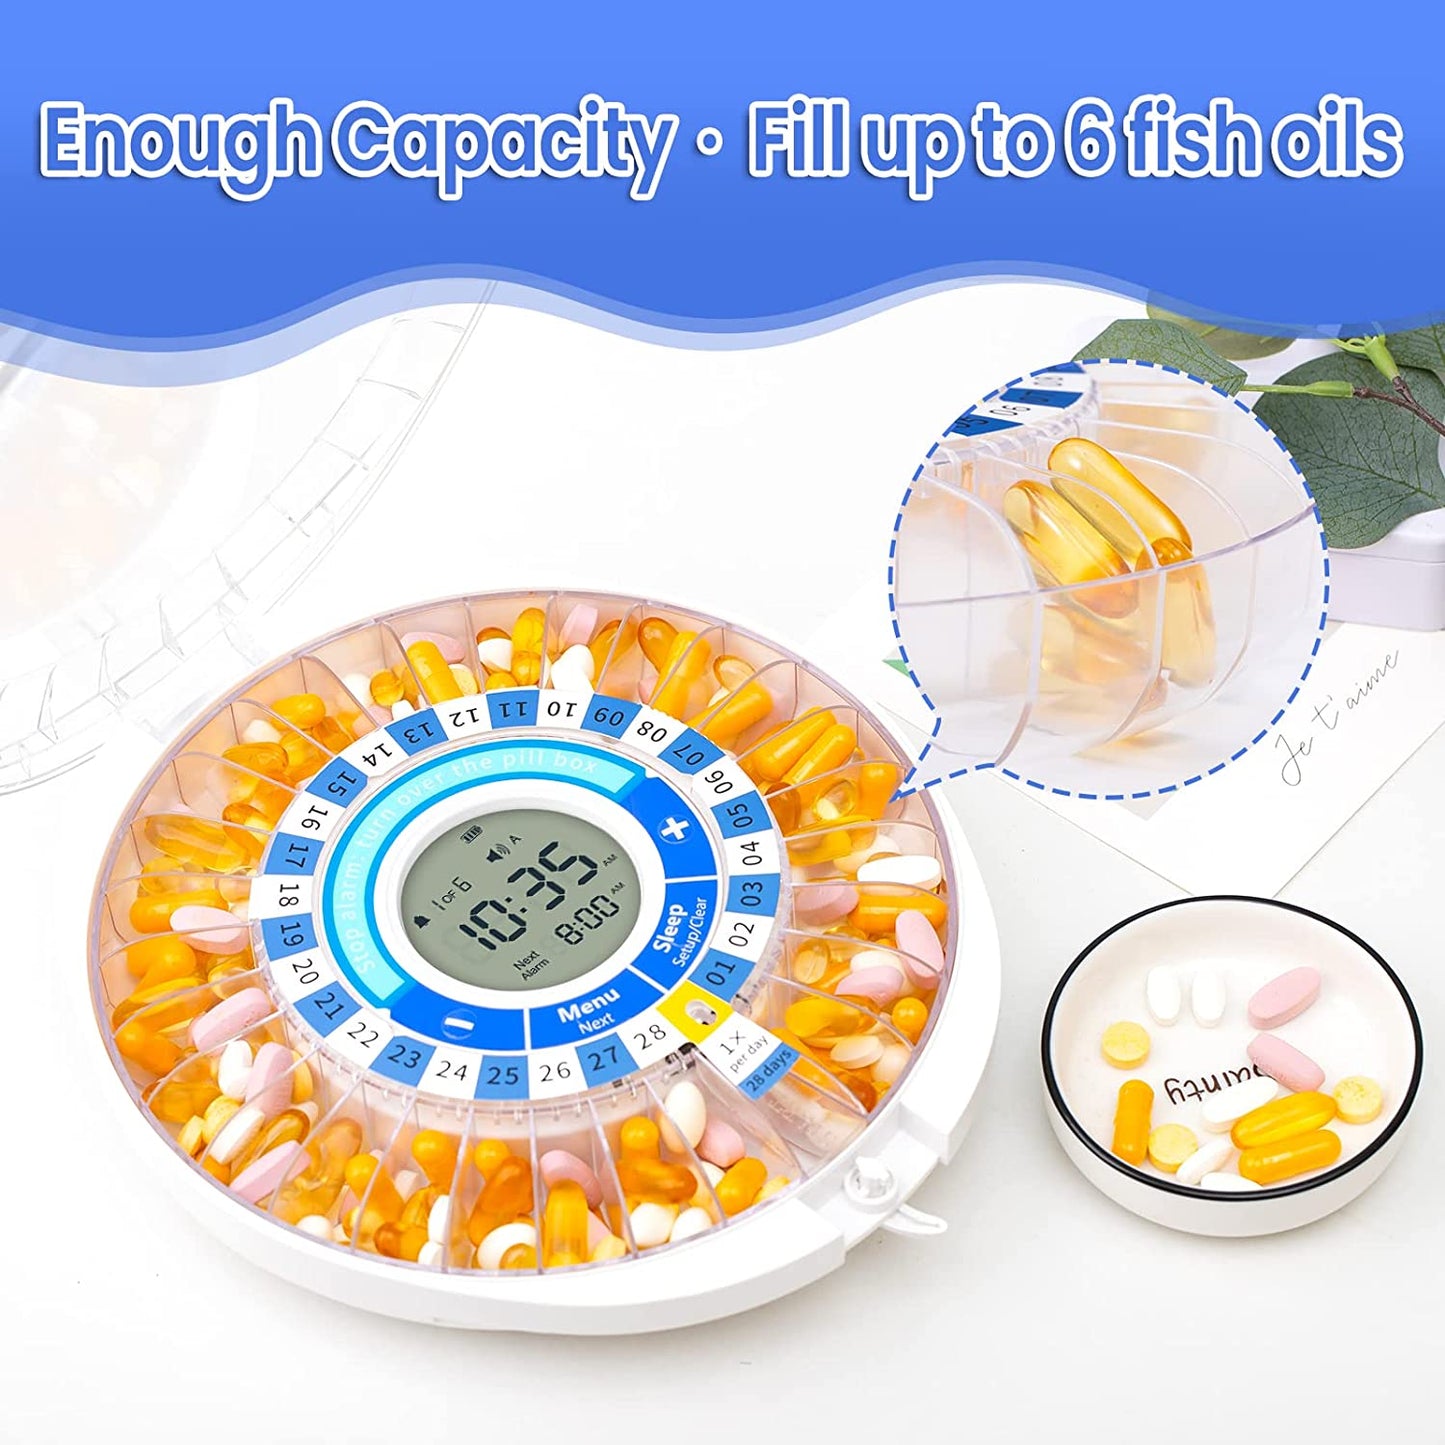 Automatic Pill Dispenser with Alarm